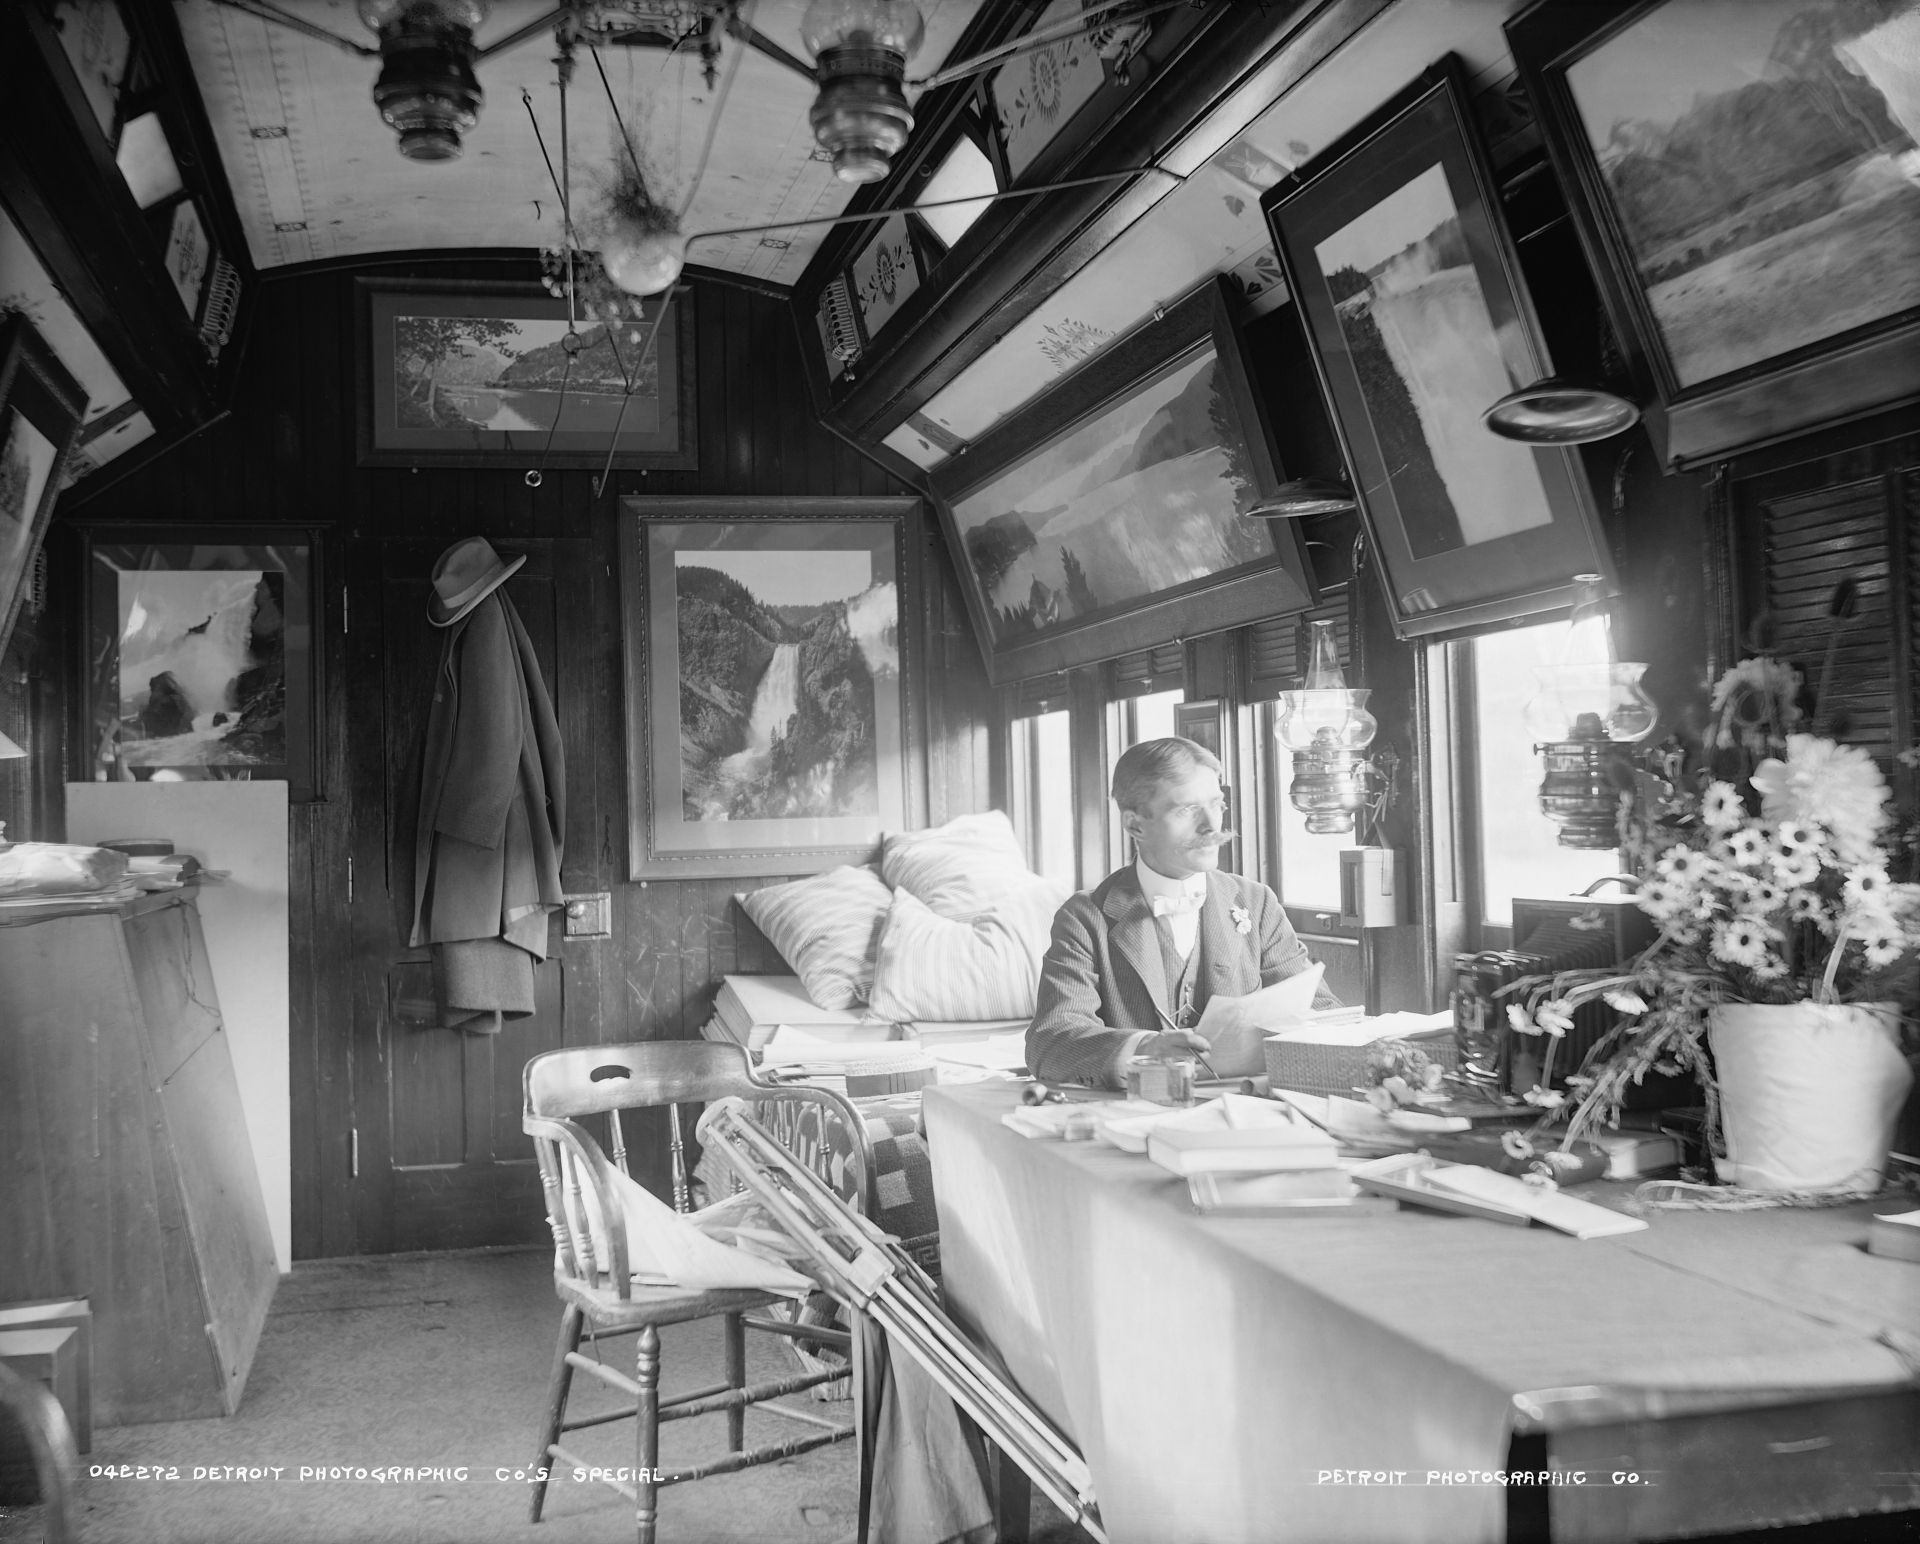 Photographer William Henry Jackson aboard the Detroit Photographic Co.'s special railroad car in 1902.jpeg